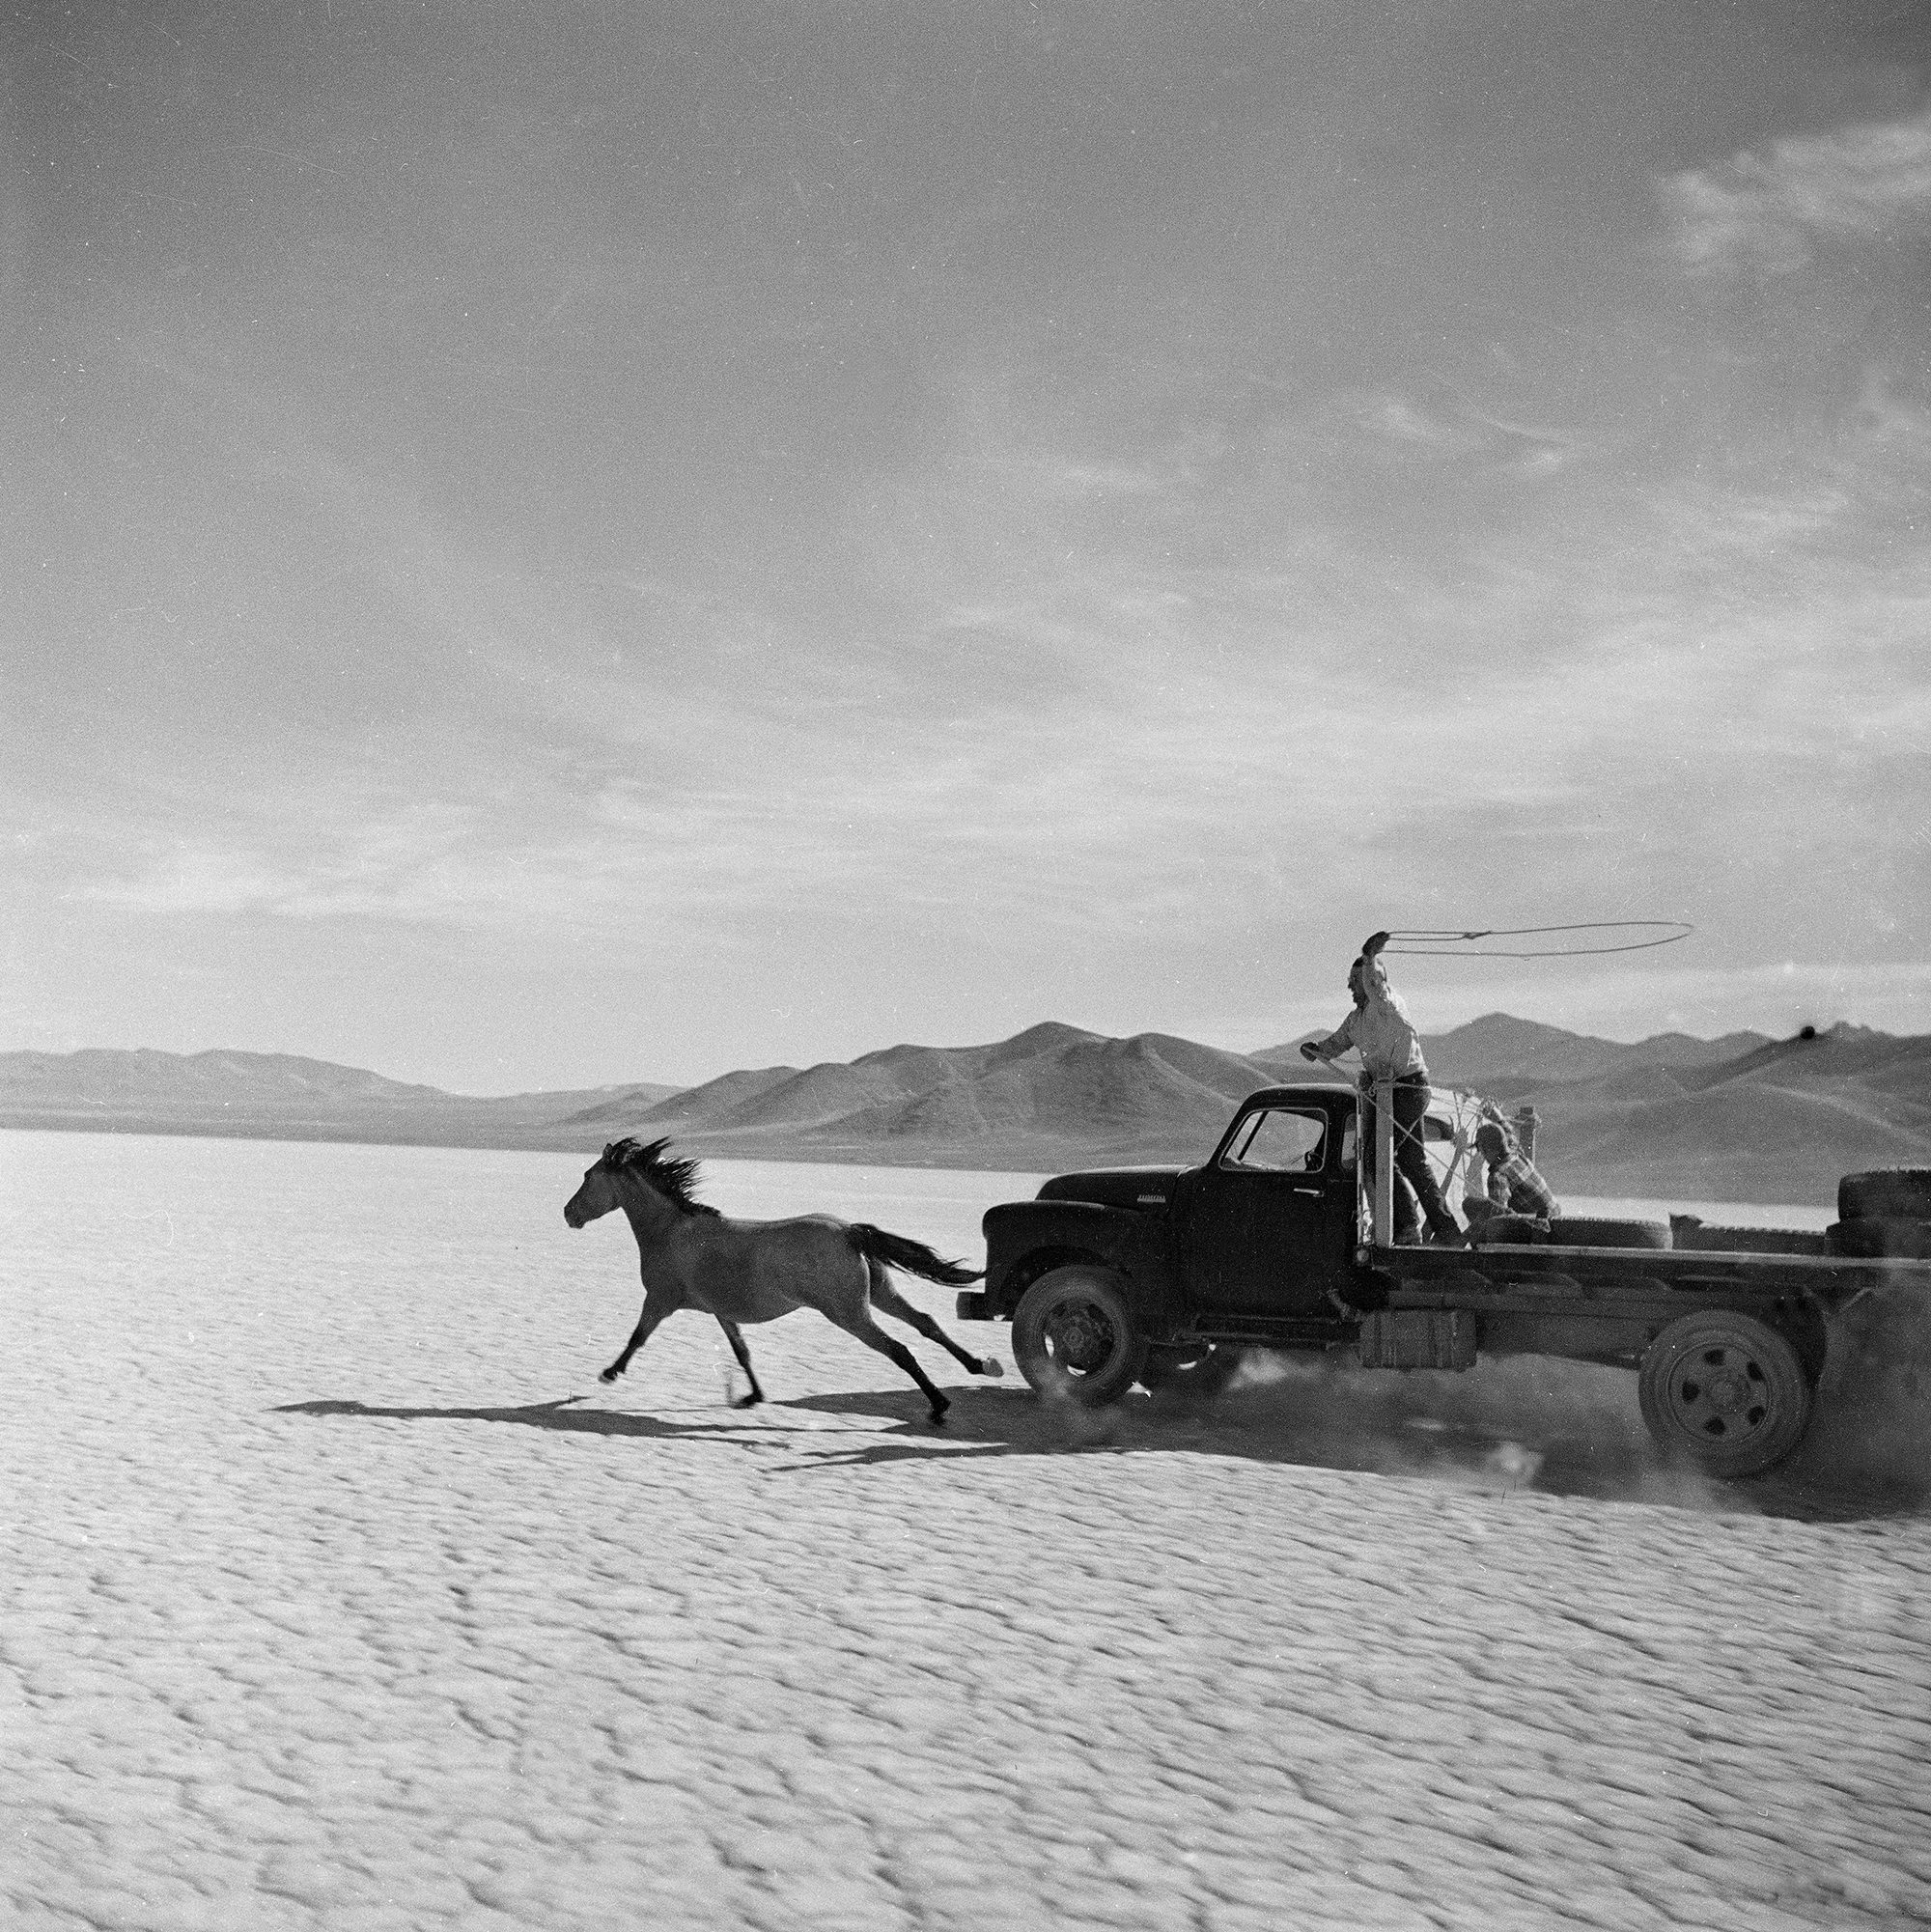 A wild horse running along a dusty valley floor, being chased by a pickup truck. A man stands up in the bed of the pickup, whirling a lasso overhead, ready to capture the horse.